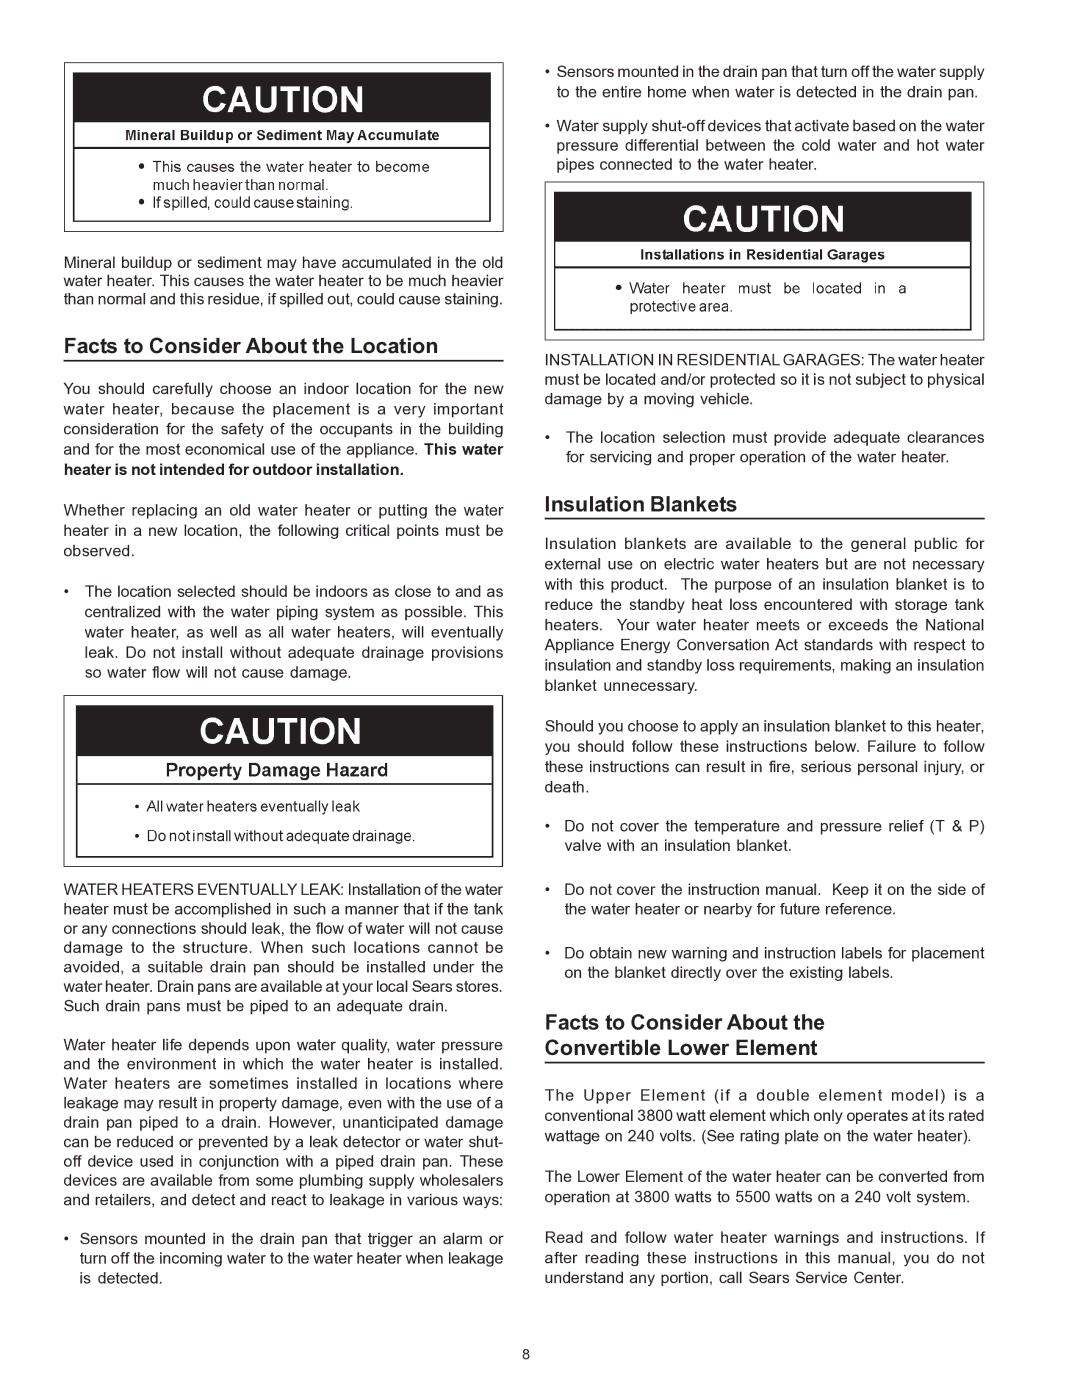 Sears 153.329264 owner manual Facts to Consider About the Location, Insulation Blankets 